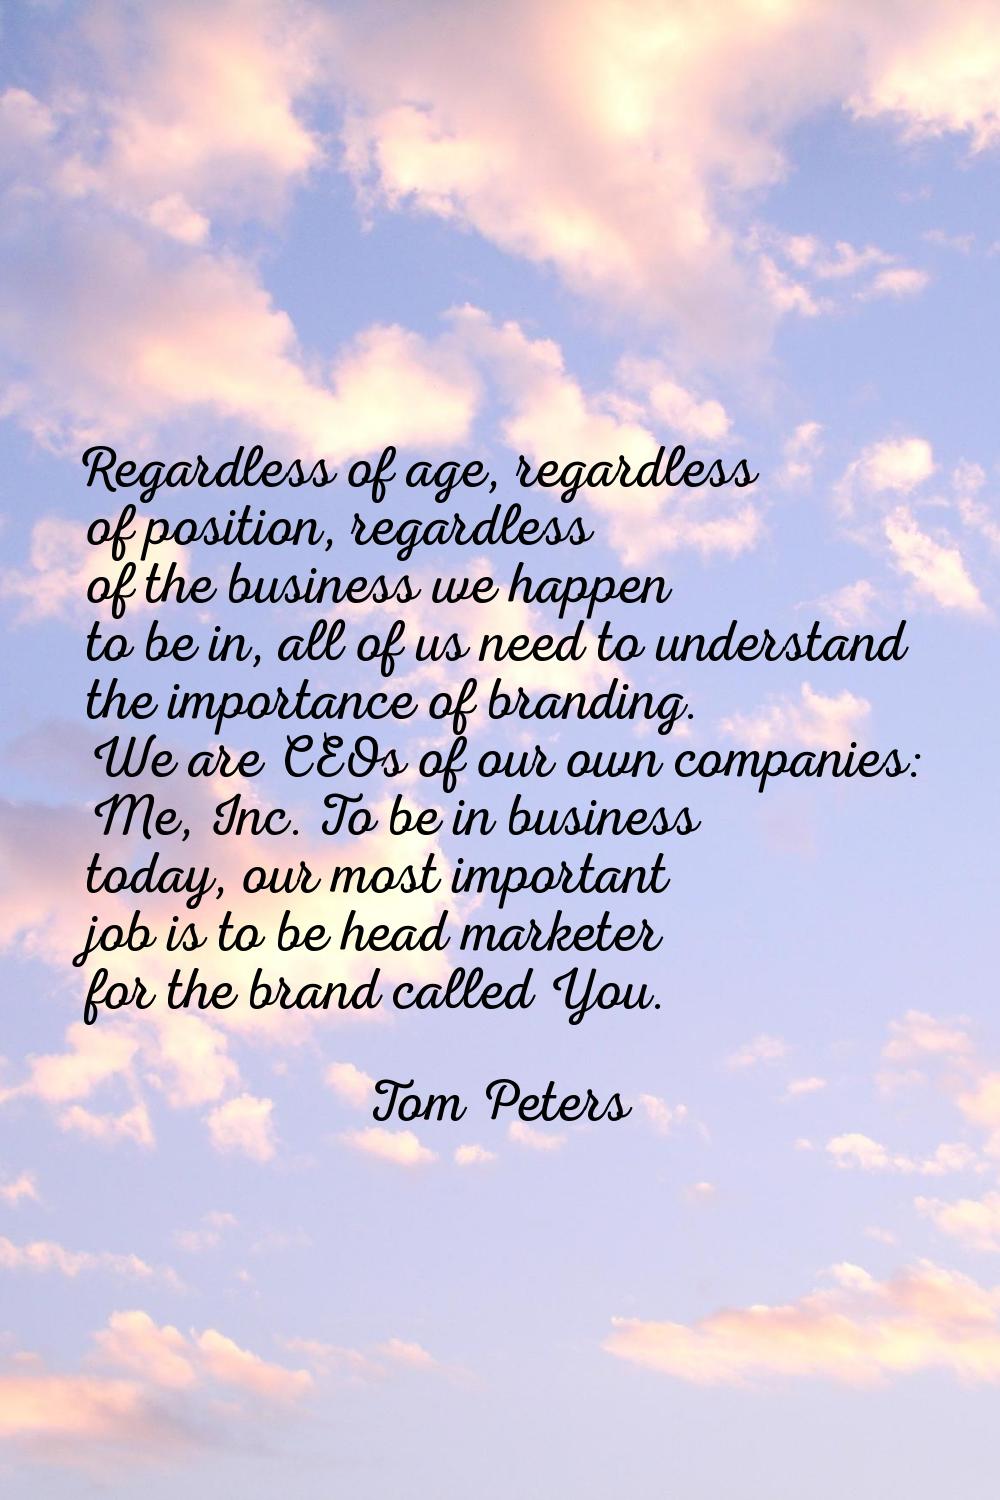 Regardless of age, regardless of position, regardless of the business we happen to be in, all of us